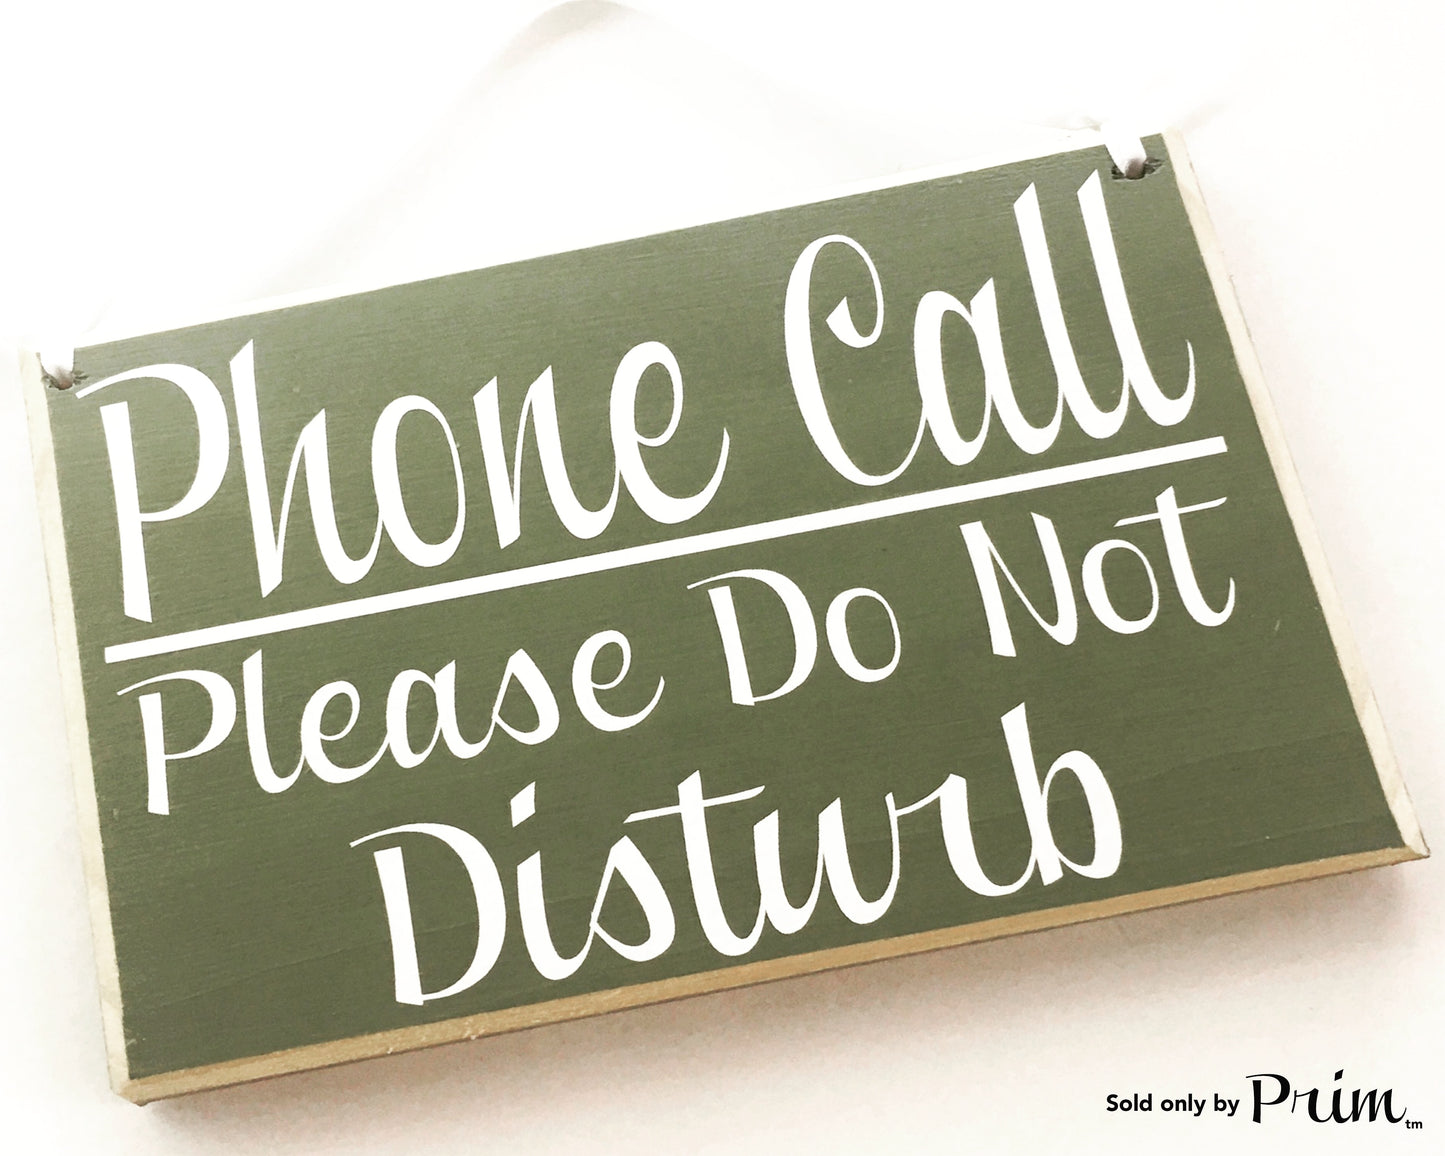 8x6 Phone Call Please Do Not Disturb (Choose Color) Office Salon Spa Meeting Please Knock Welcome Door Custom Sign